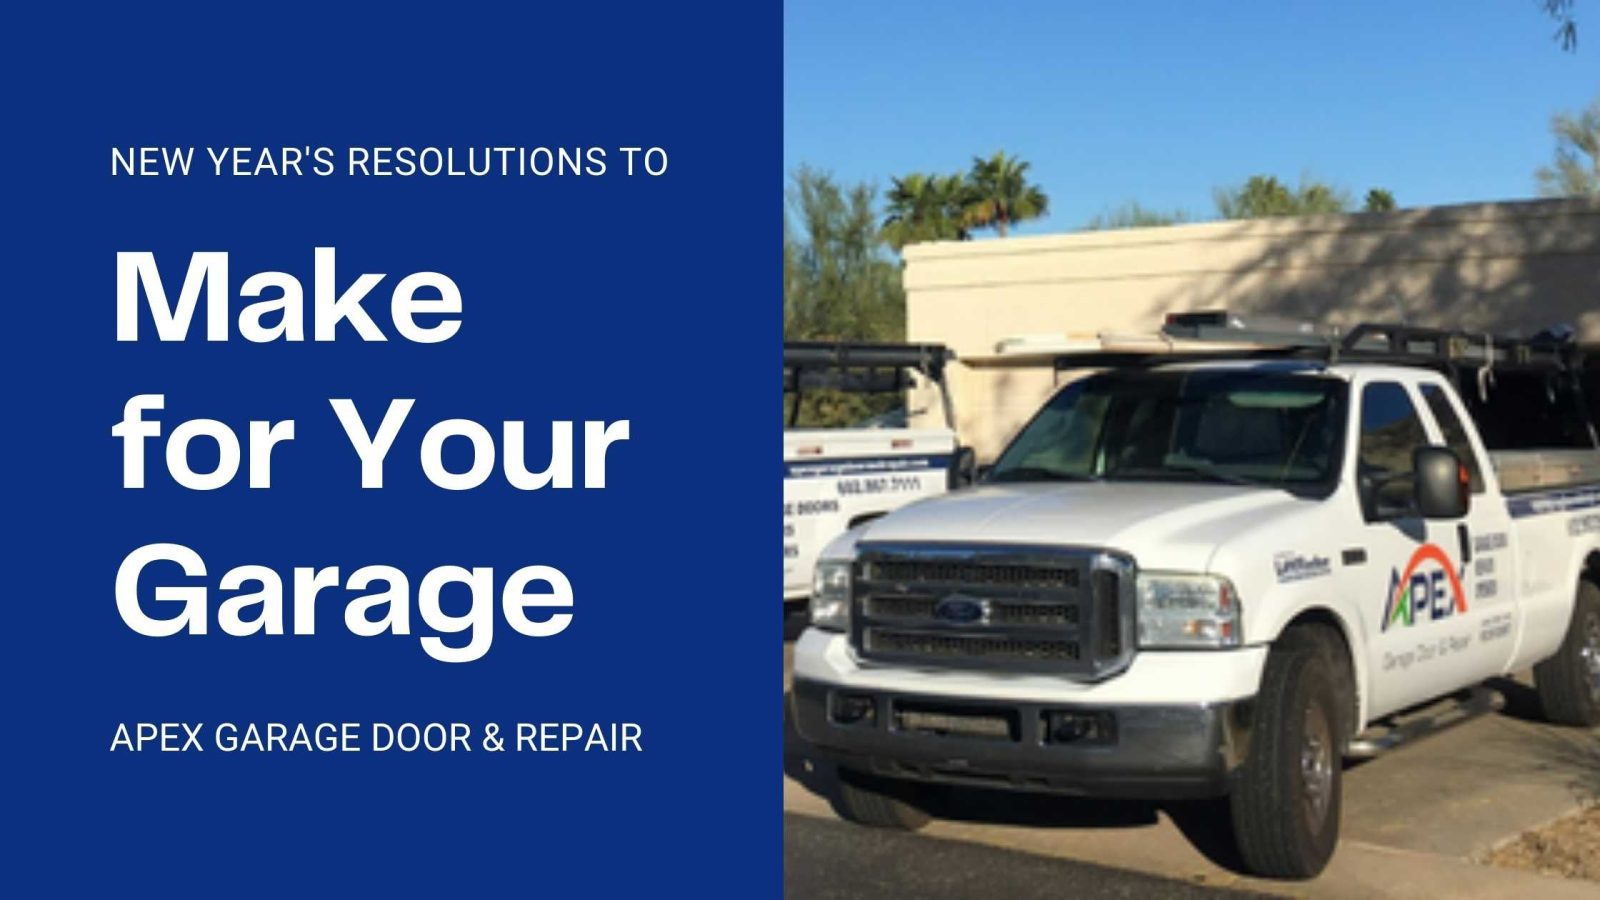 New Year’s Resolutions to Make for Your Garage